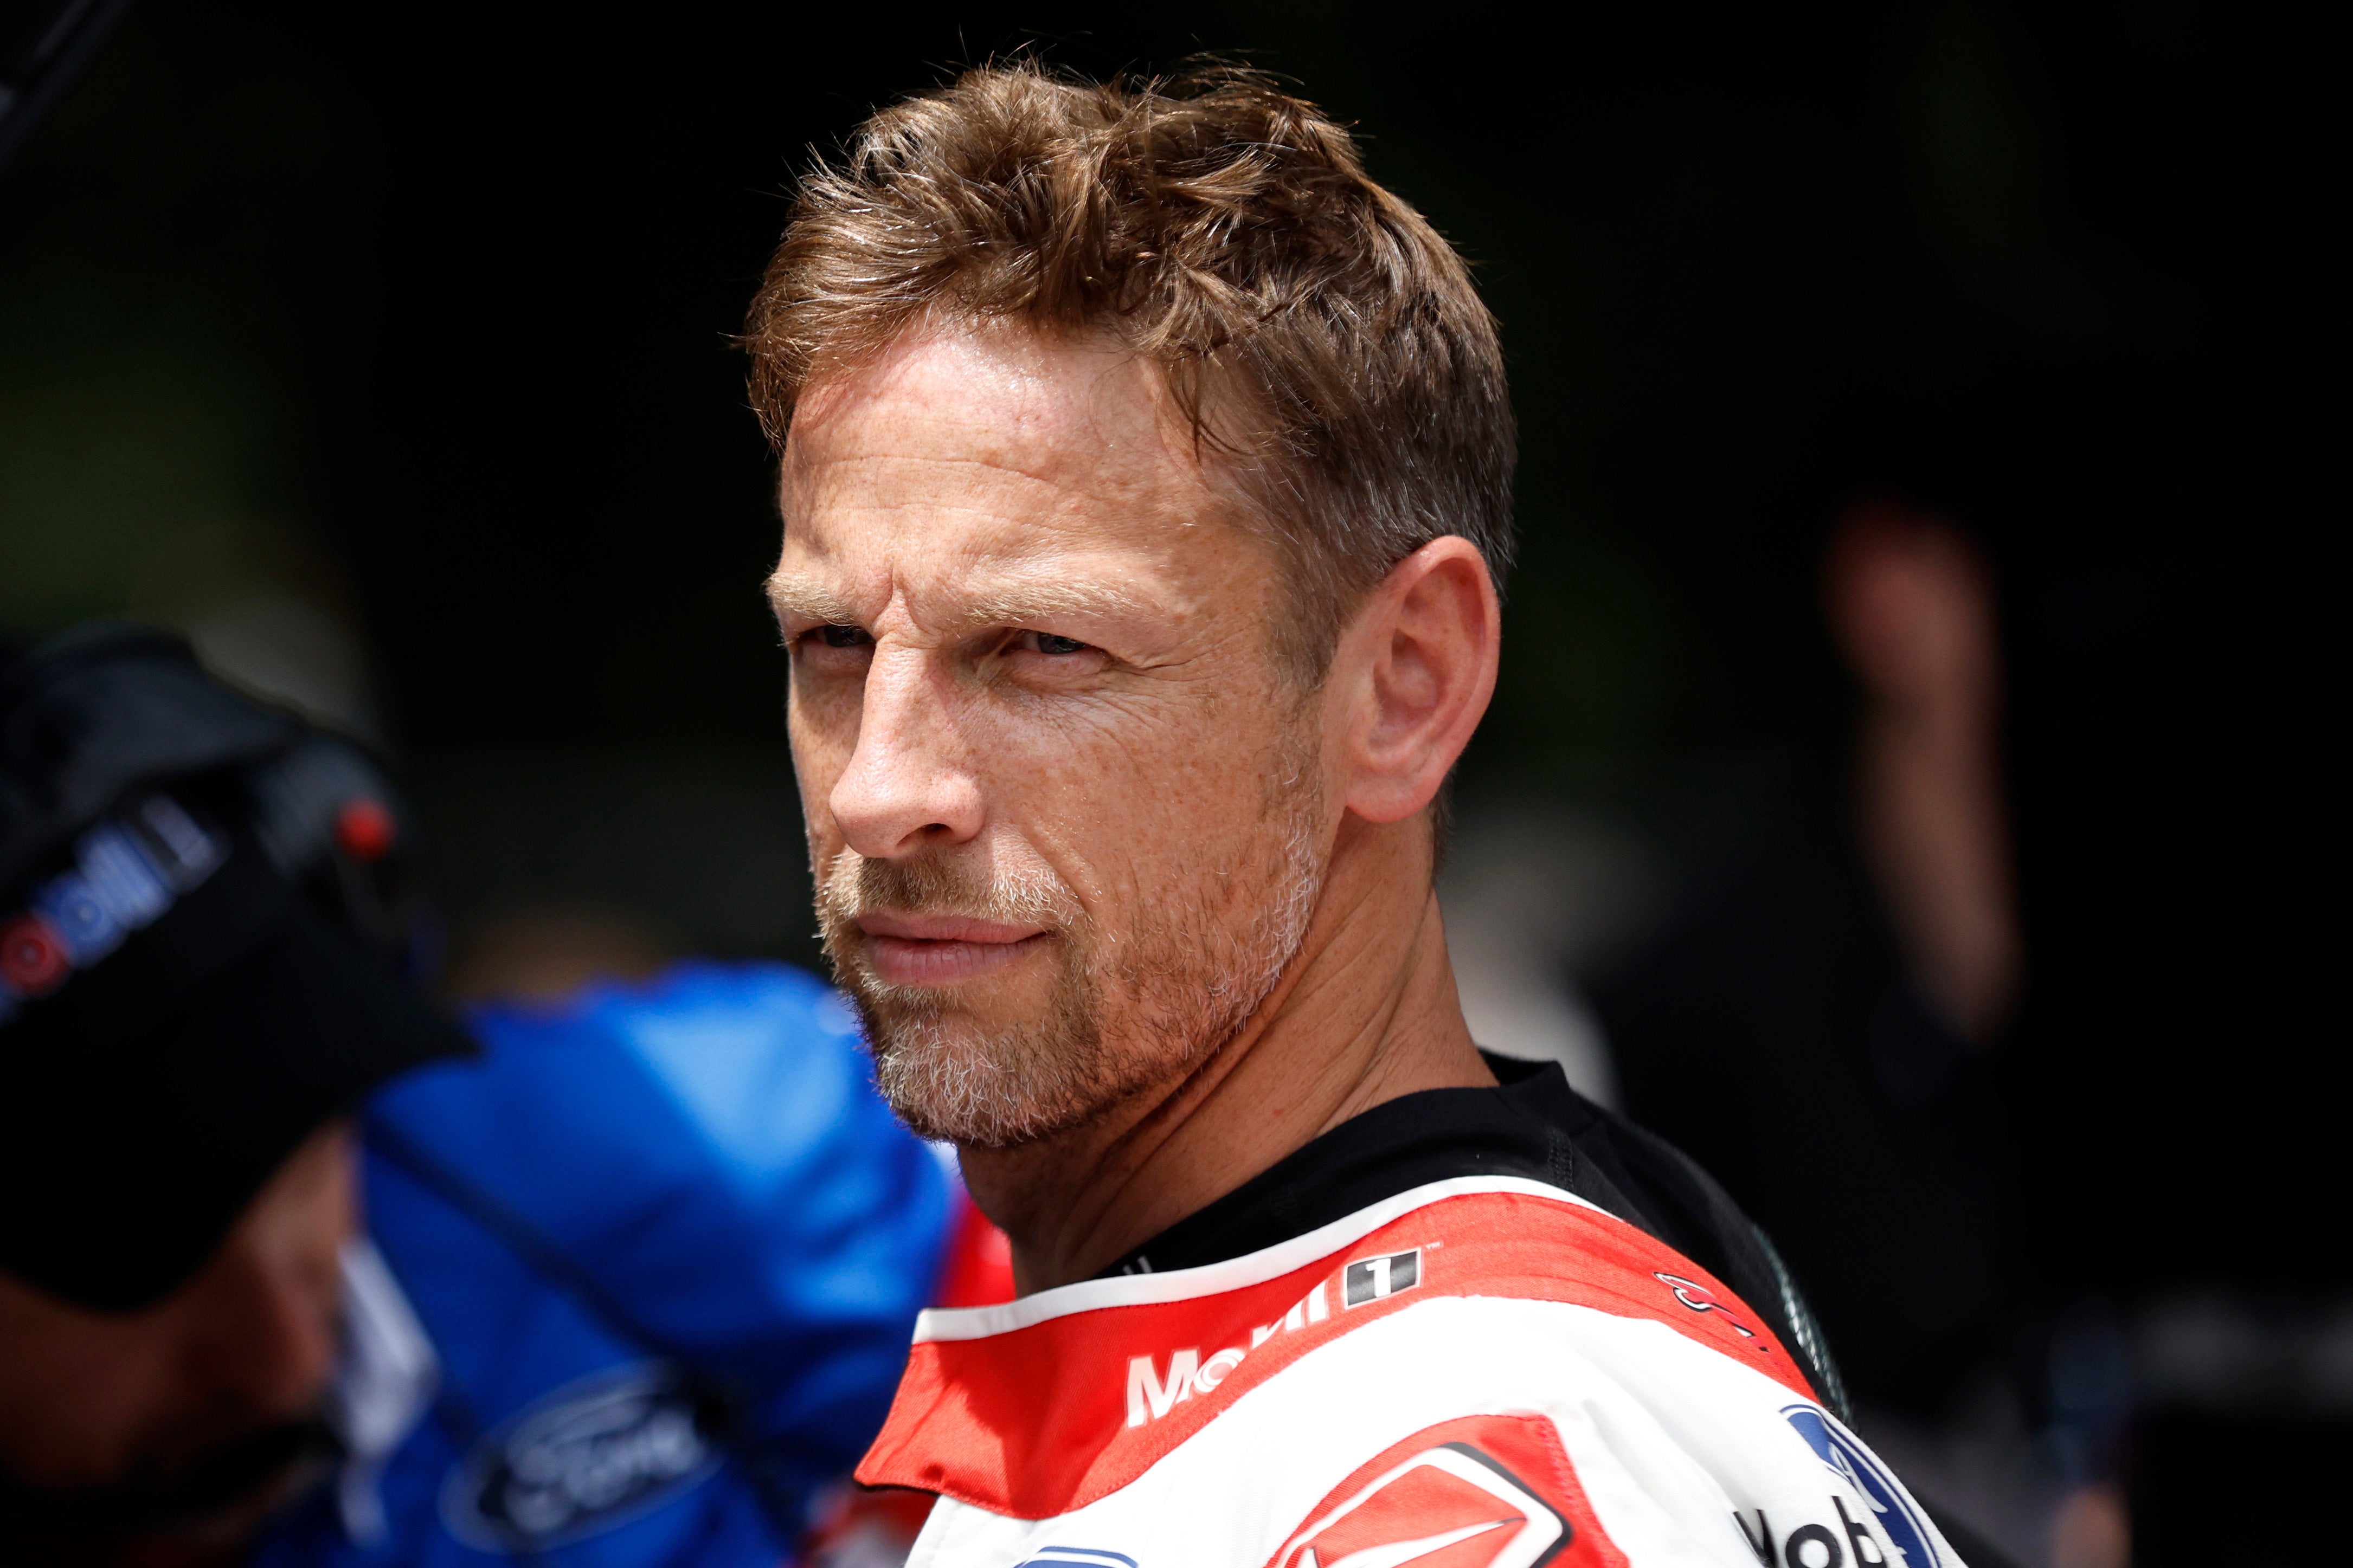 Jenson Button has announced his return to top-tier motorsport in 2024